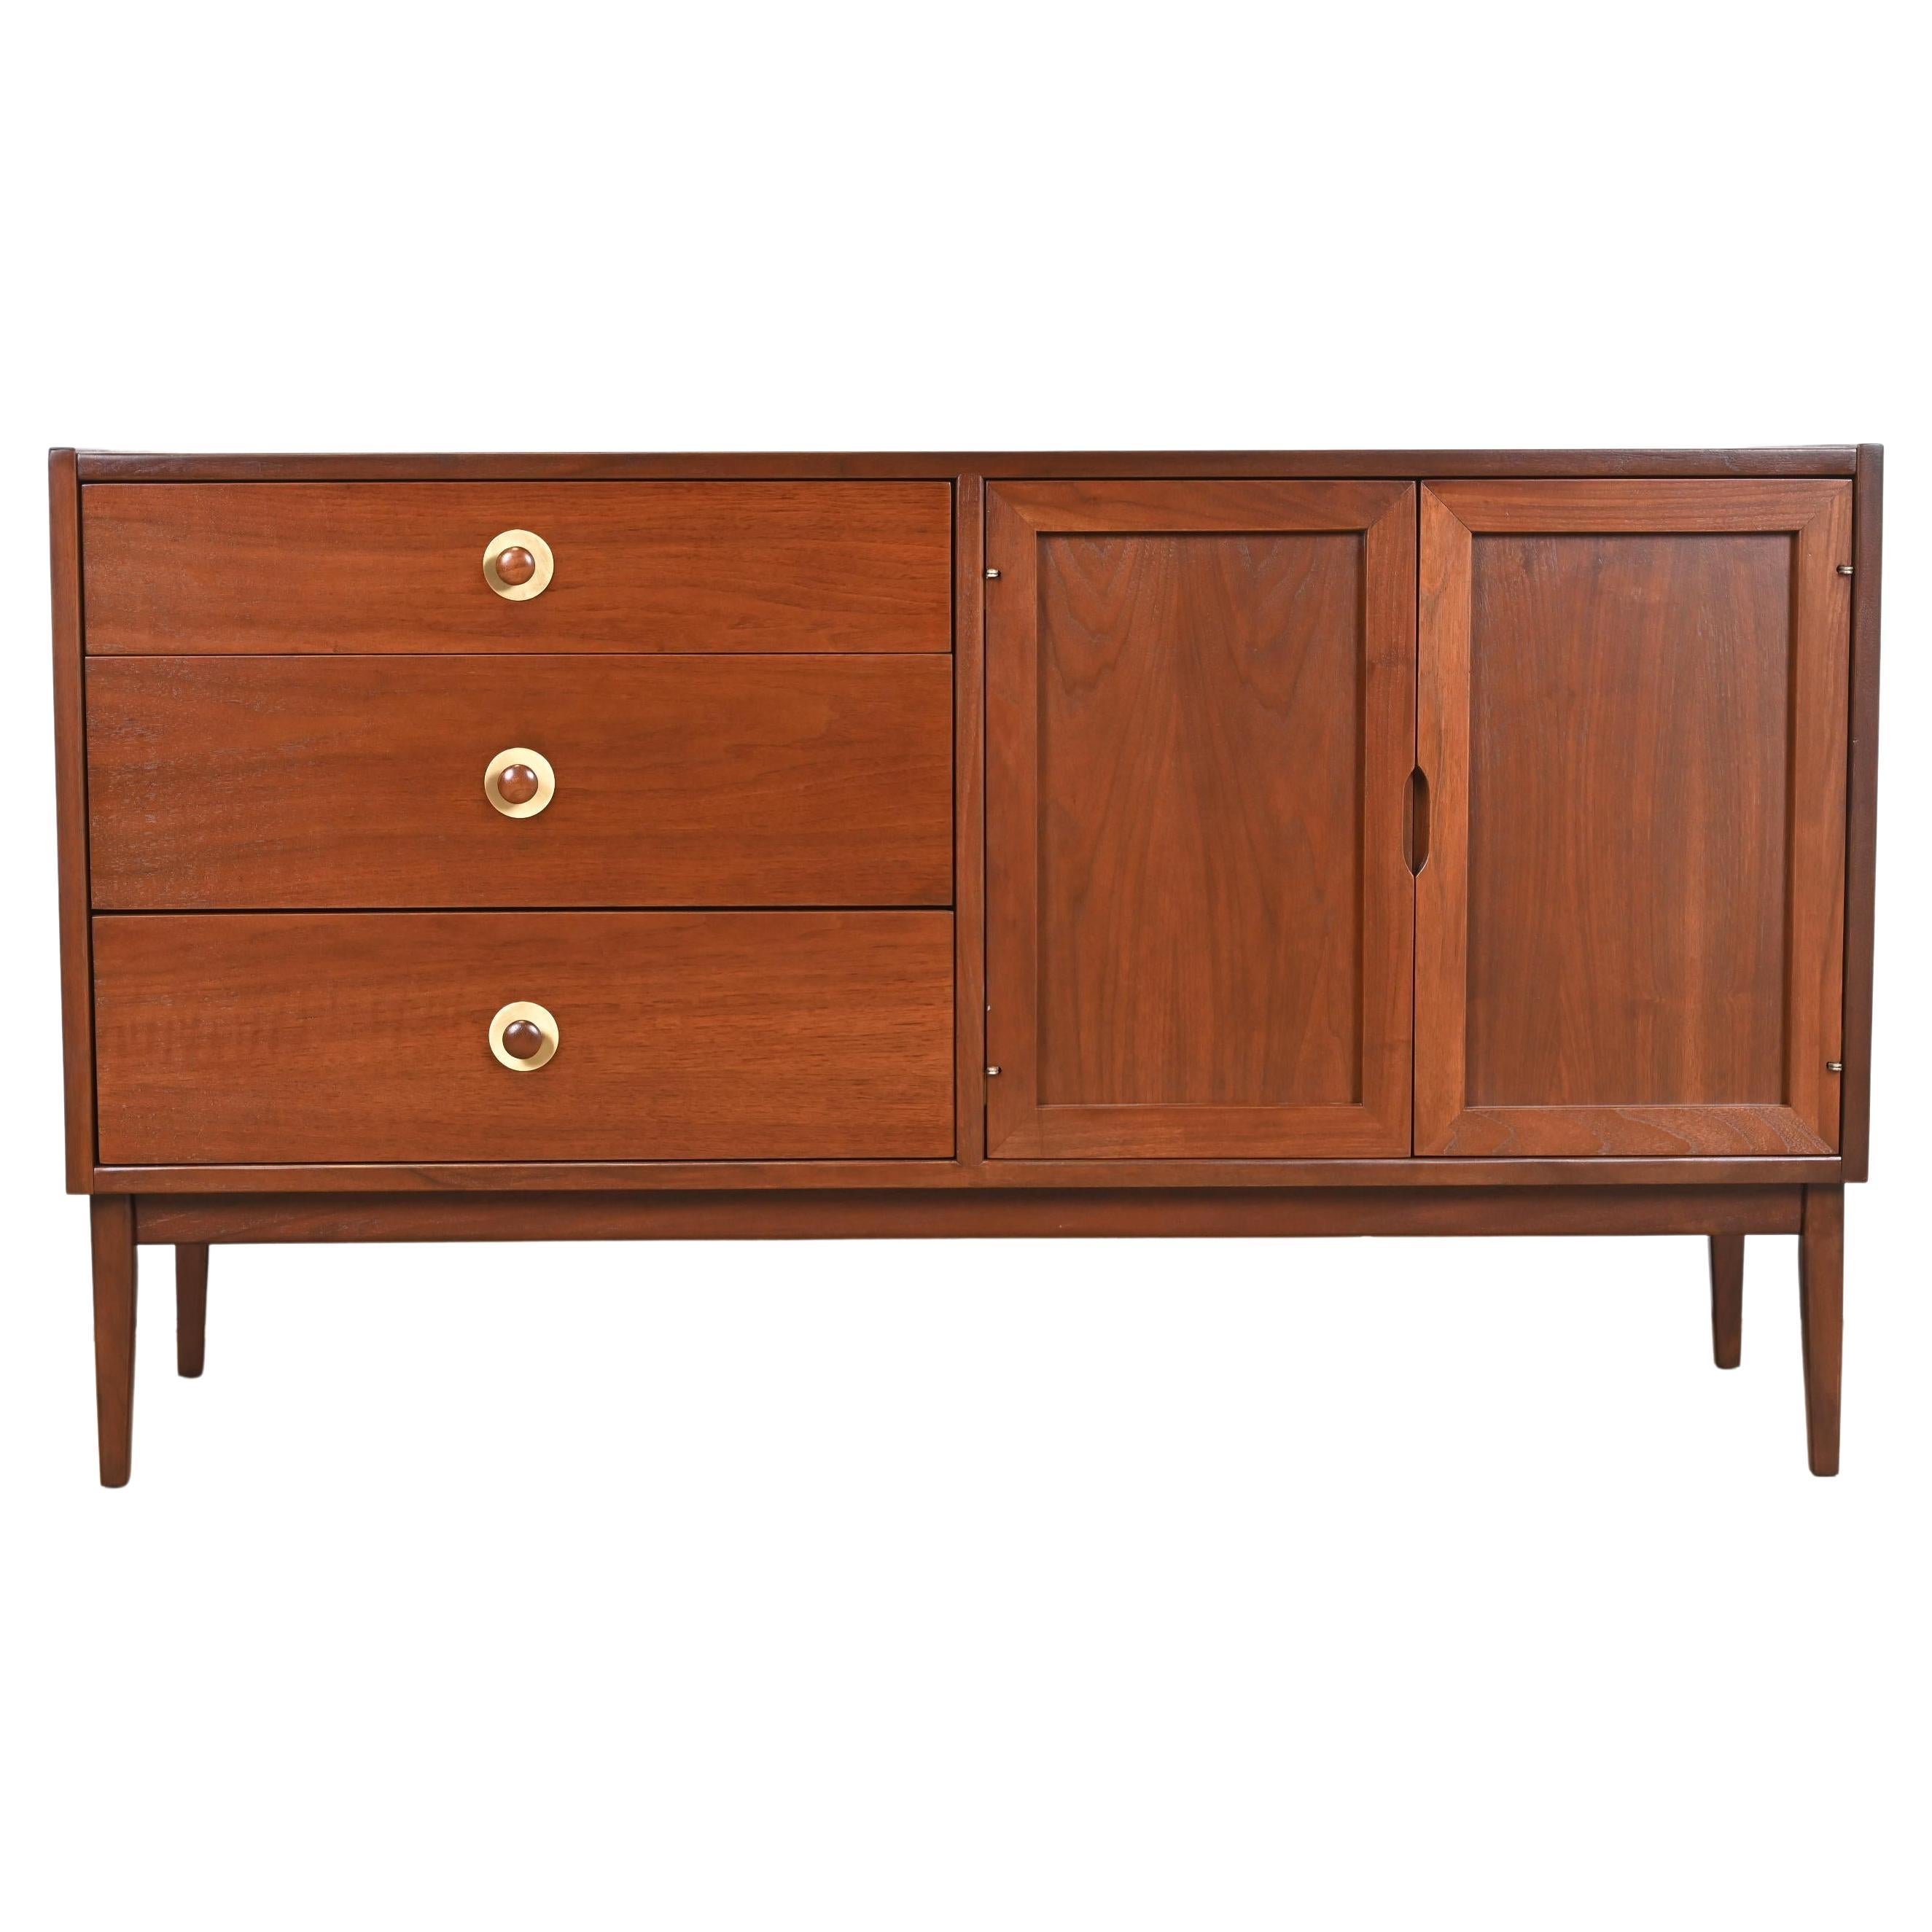 Jack Cartwright for Founders Mid-Century Modern Walnut Credenza, Refinished